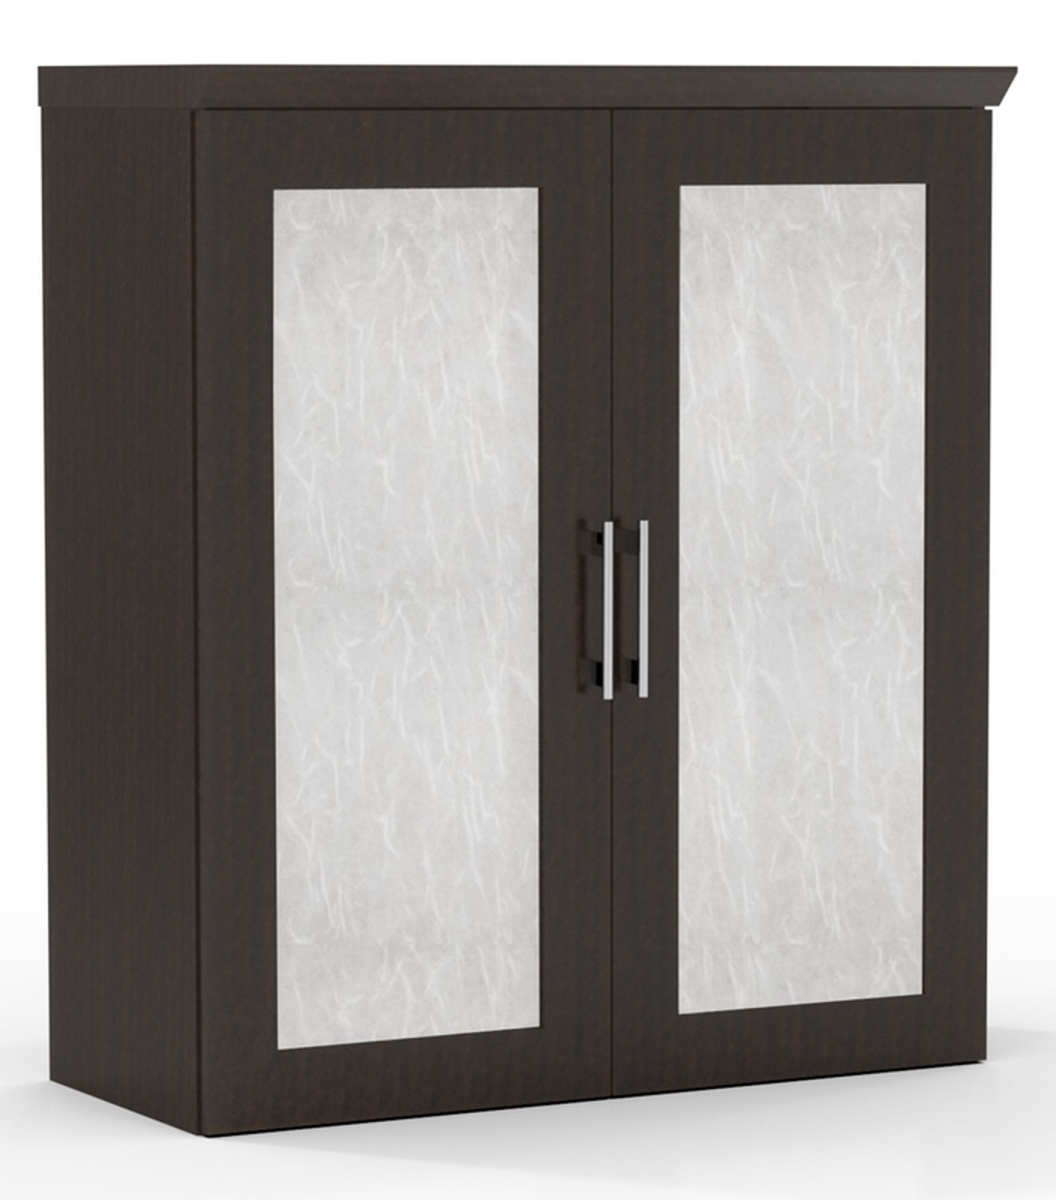 Stscadtdc Sterling Storage Cabinet With Acrylic Doors - Textured Mocha - 41.62 X 36 X 16.5 In.